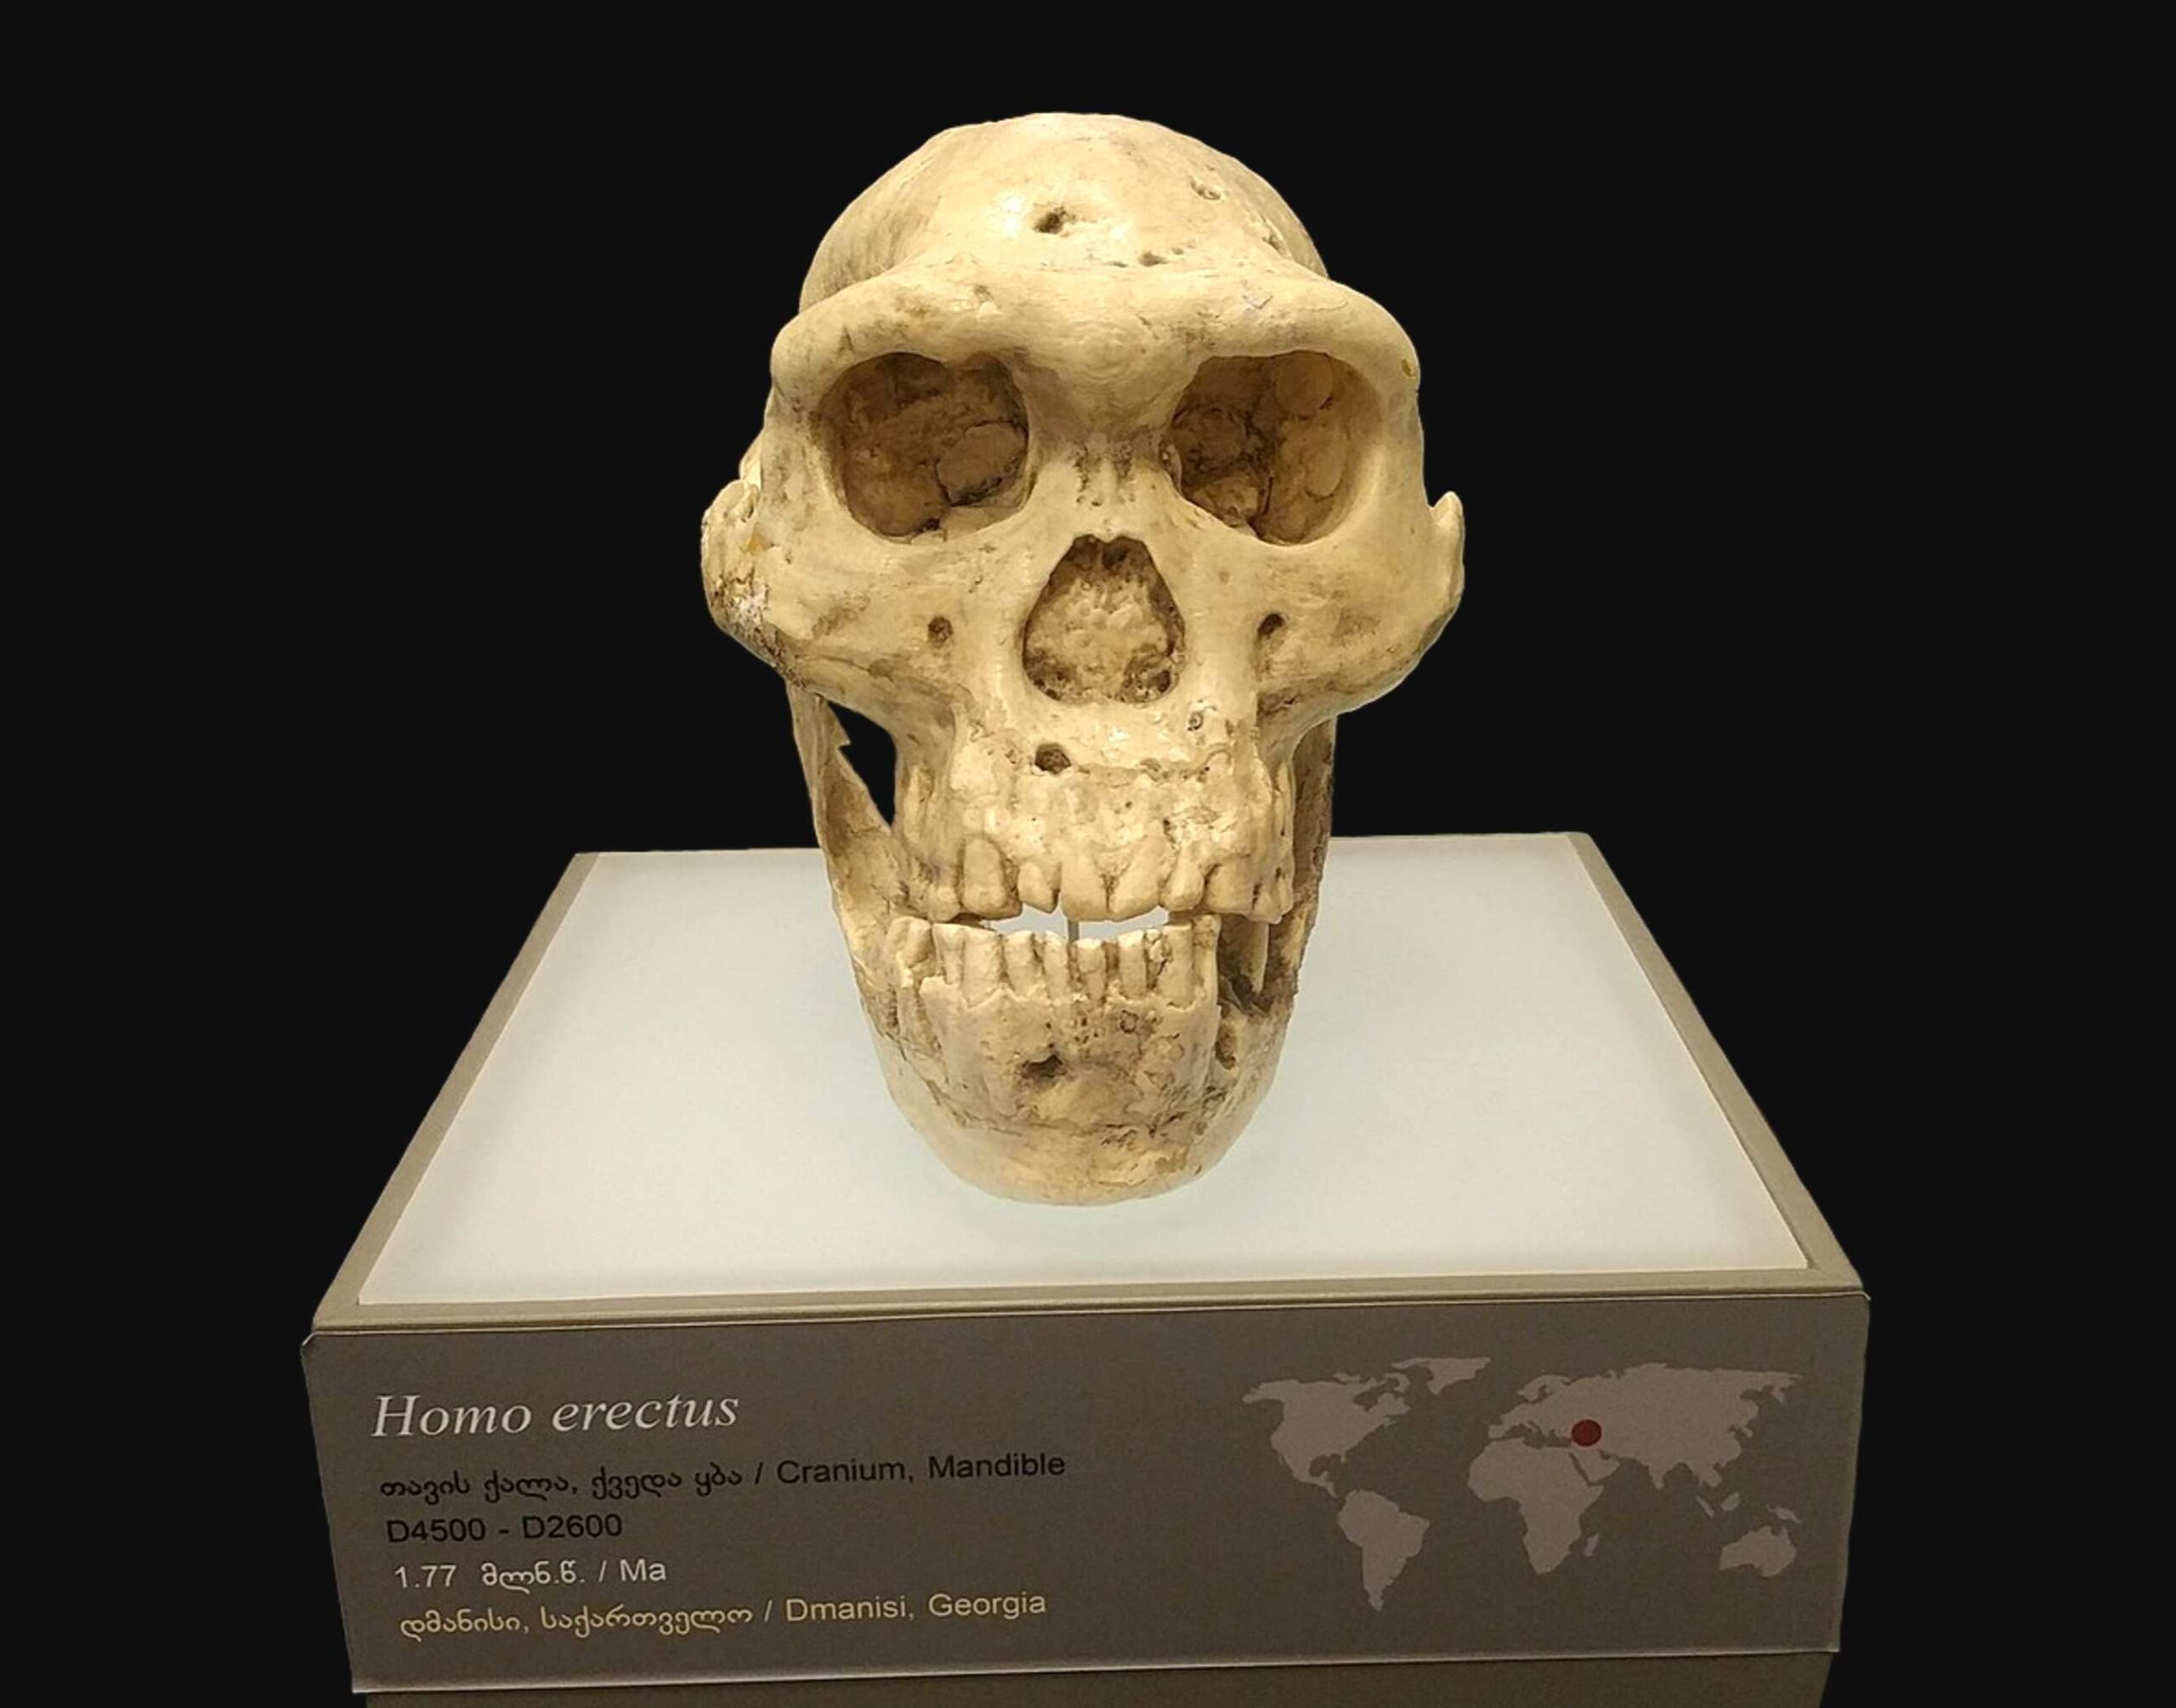 Skull 5 ― A million years old human skull forced scientists to rethink early human evolution 2